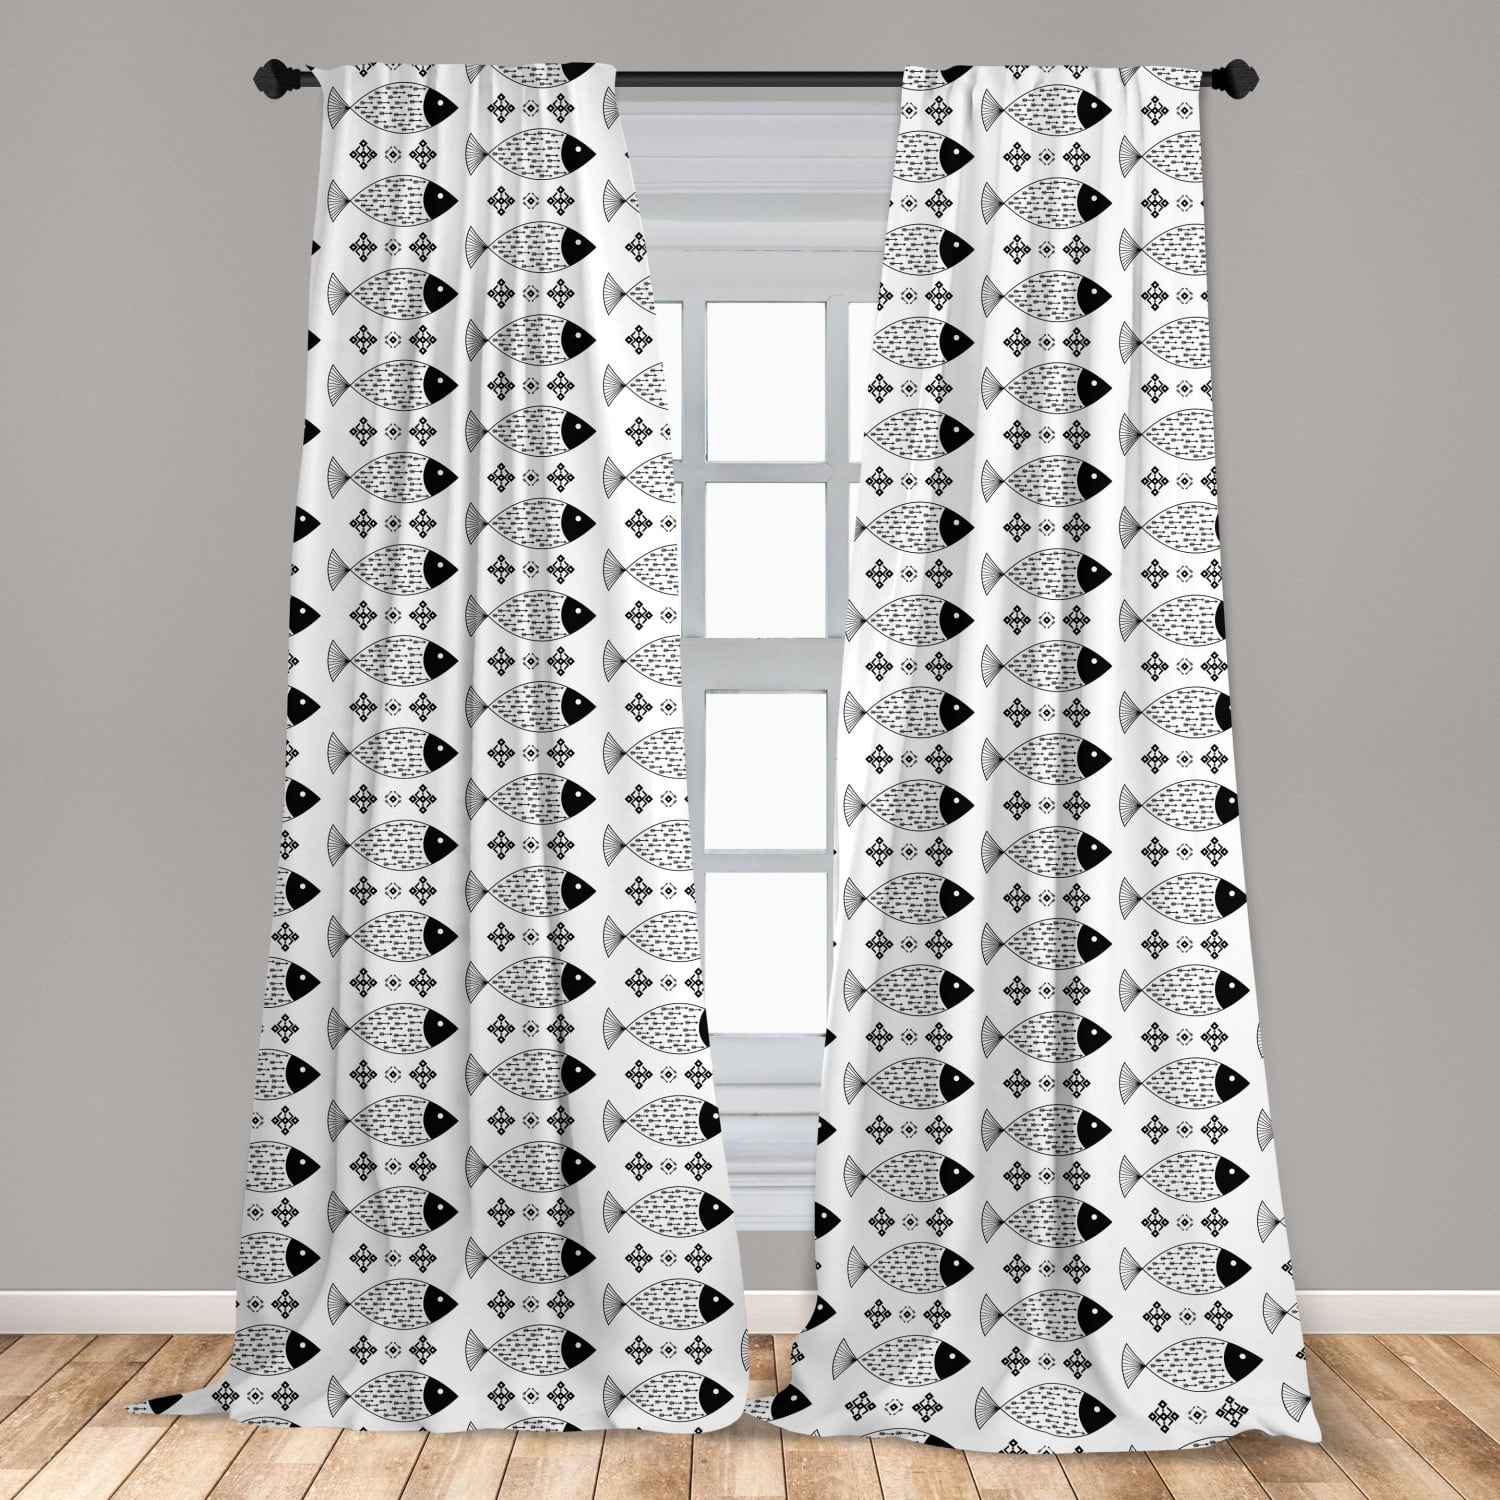 Black and White Curtains 2 Panel Set for Decor 5 Sizes Available Window Drapes 